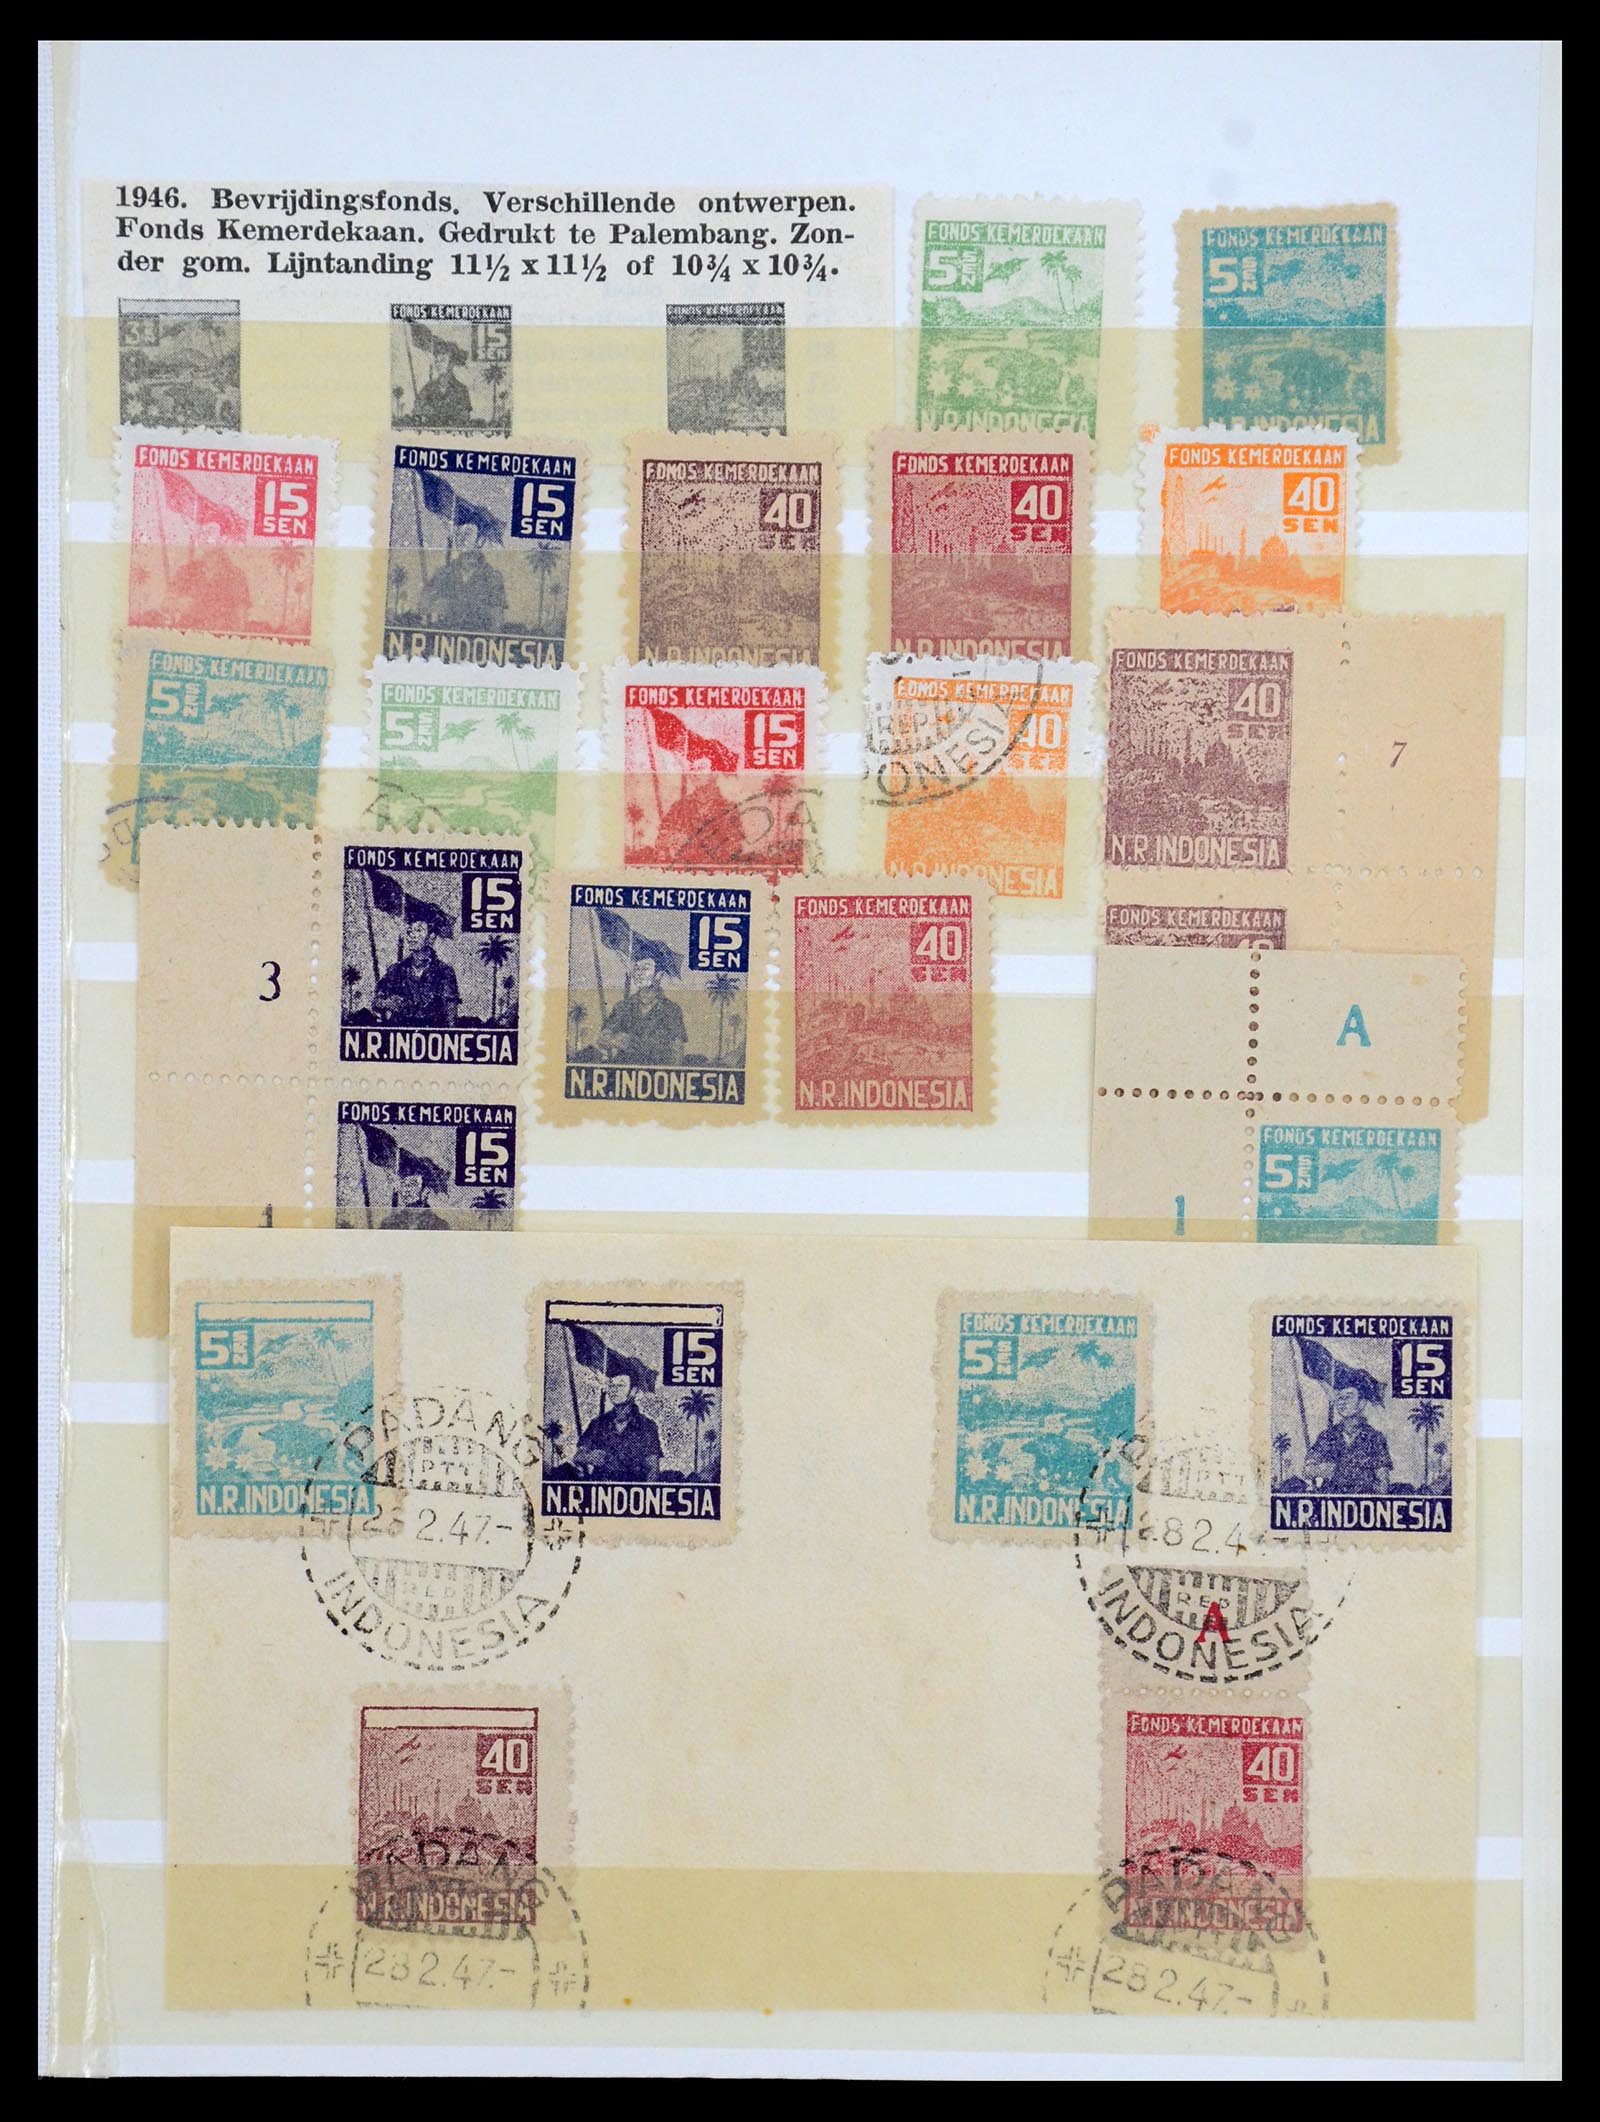 35757 019 - Stamp Collection 35757 Japanese occupation of Dutch east Indies en the i